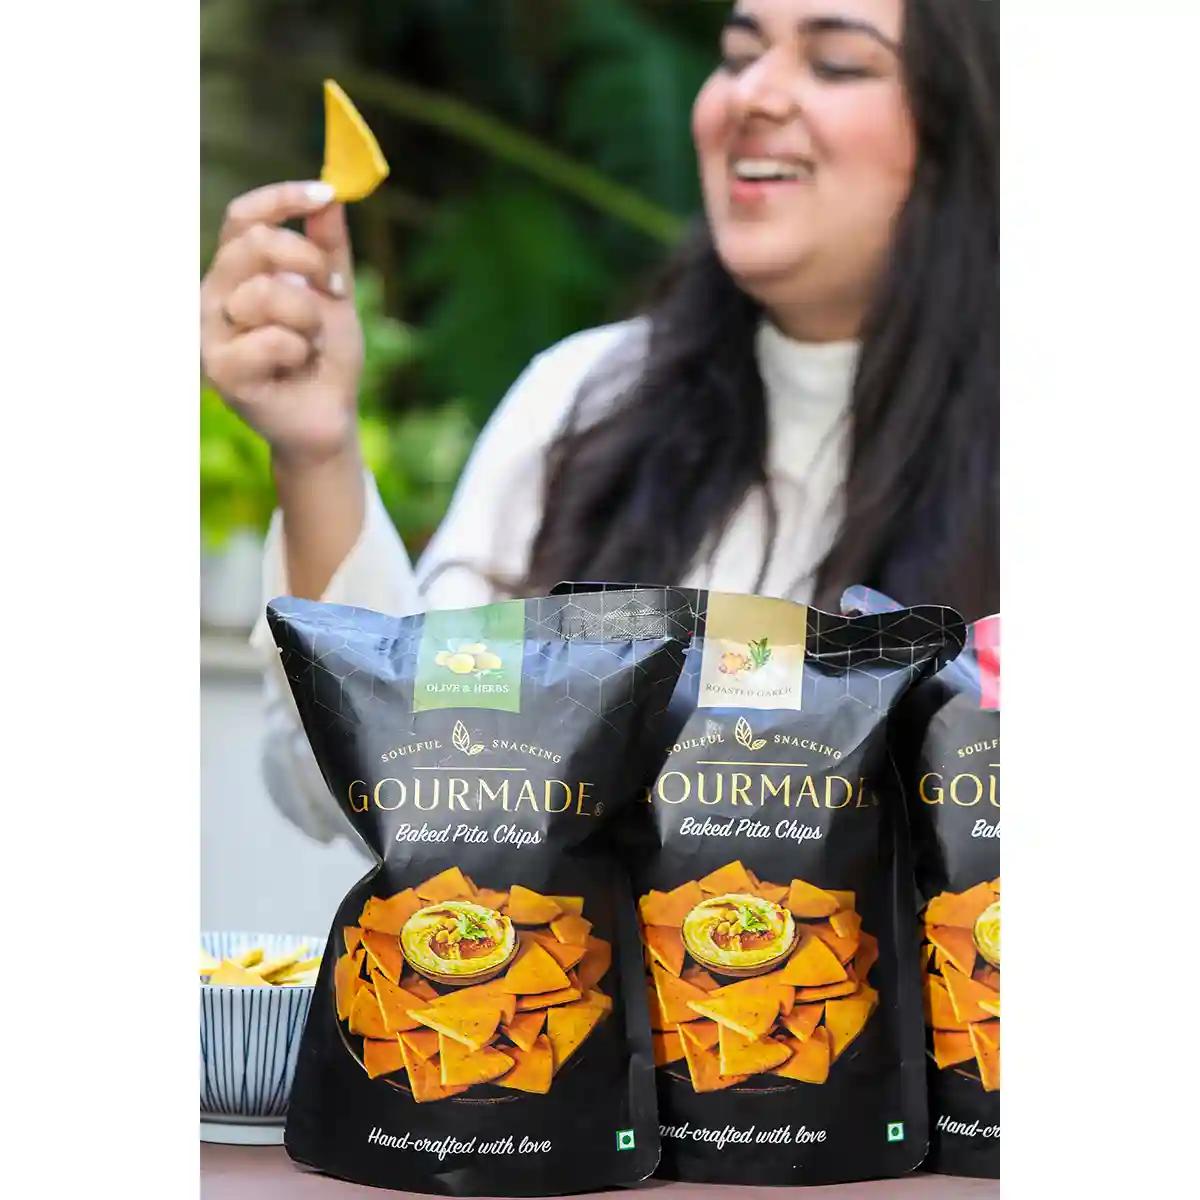 Gourmade Pita Chips Snacking Combo of 2 Roasted Garlic, 1 Olive & Herbs (375gm)